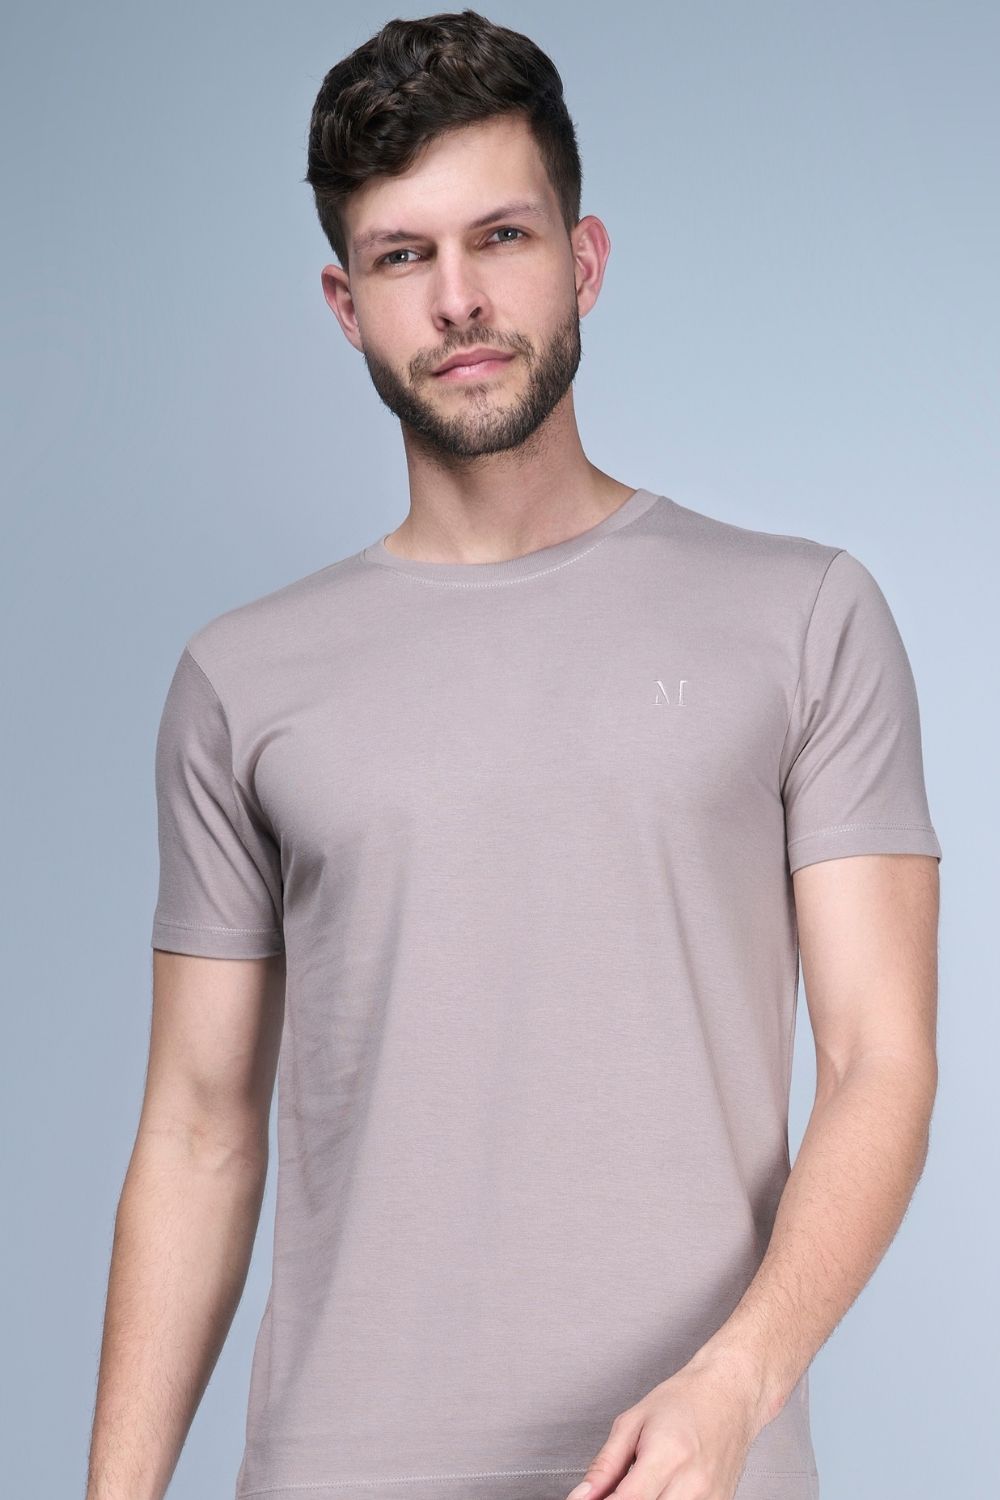 Coin grey colored, solid t shirt for men.